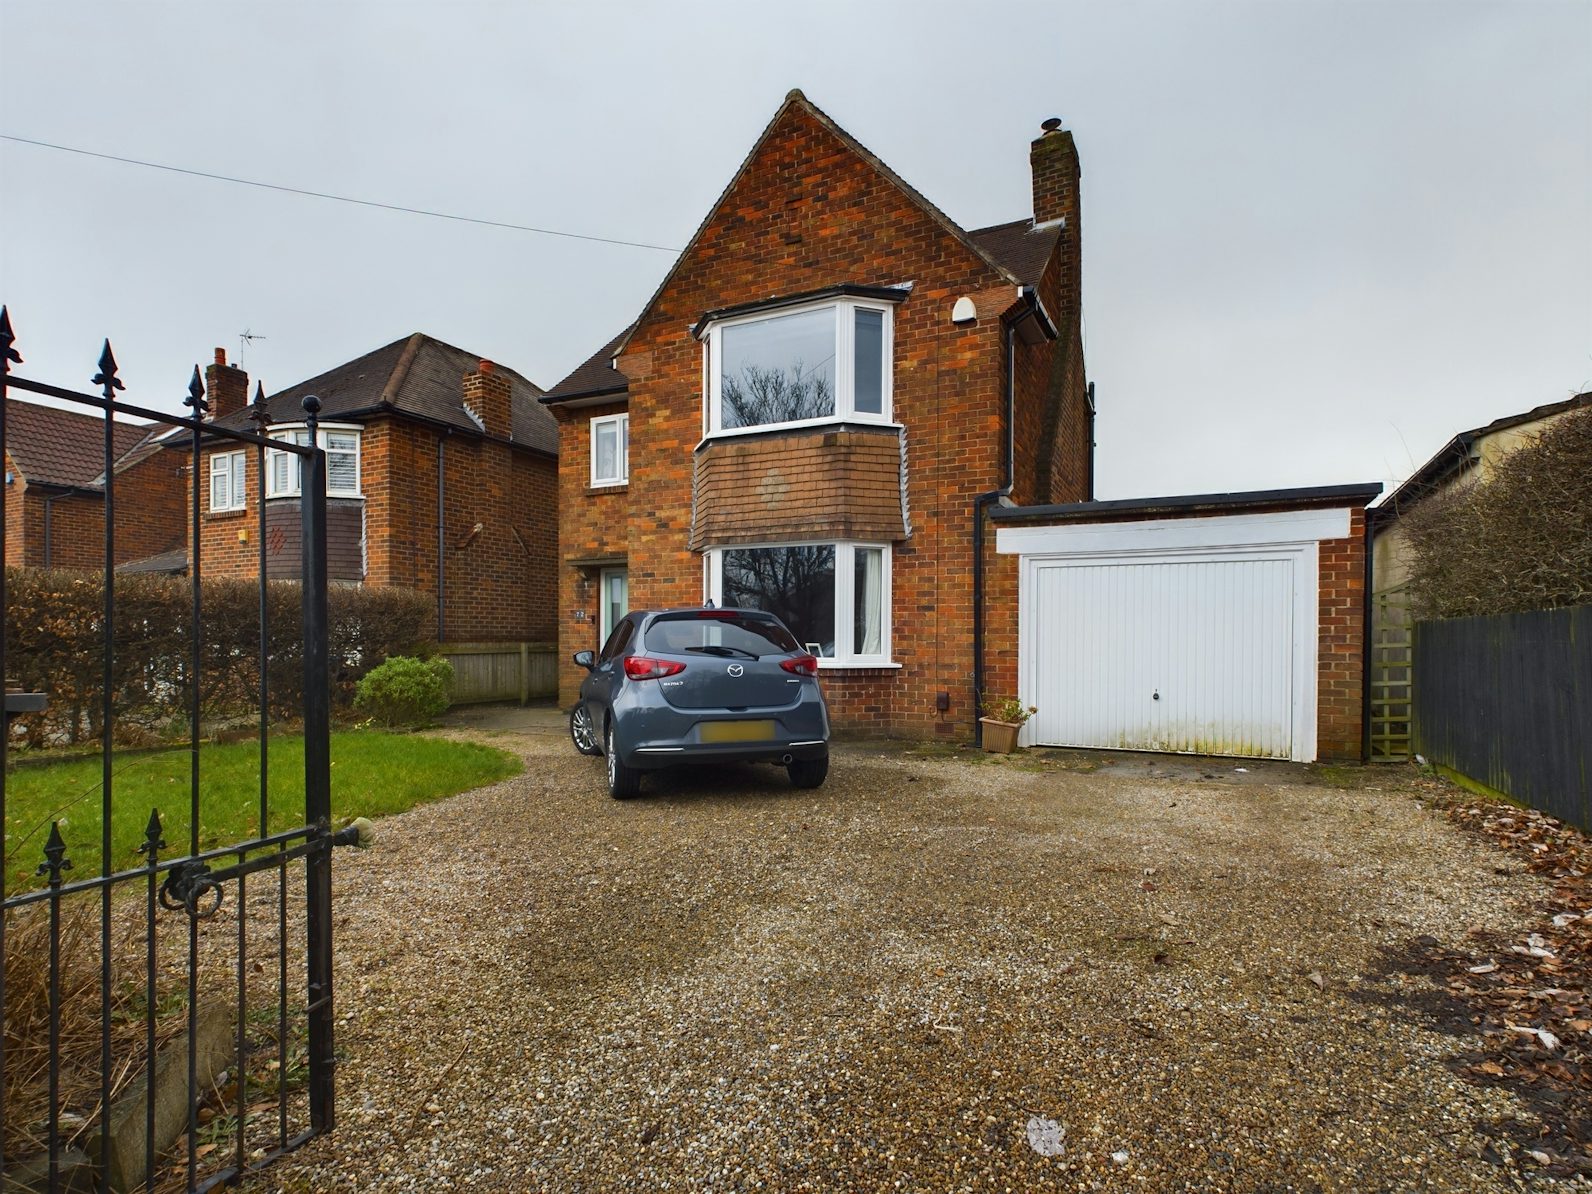 Detached House to rent on Hookstone Chase Harrogate, HG2